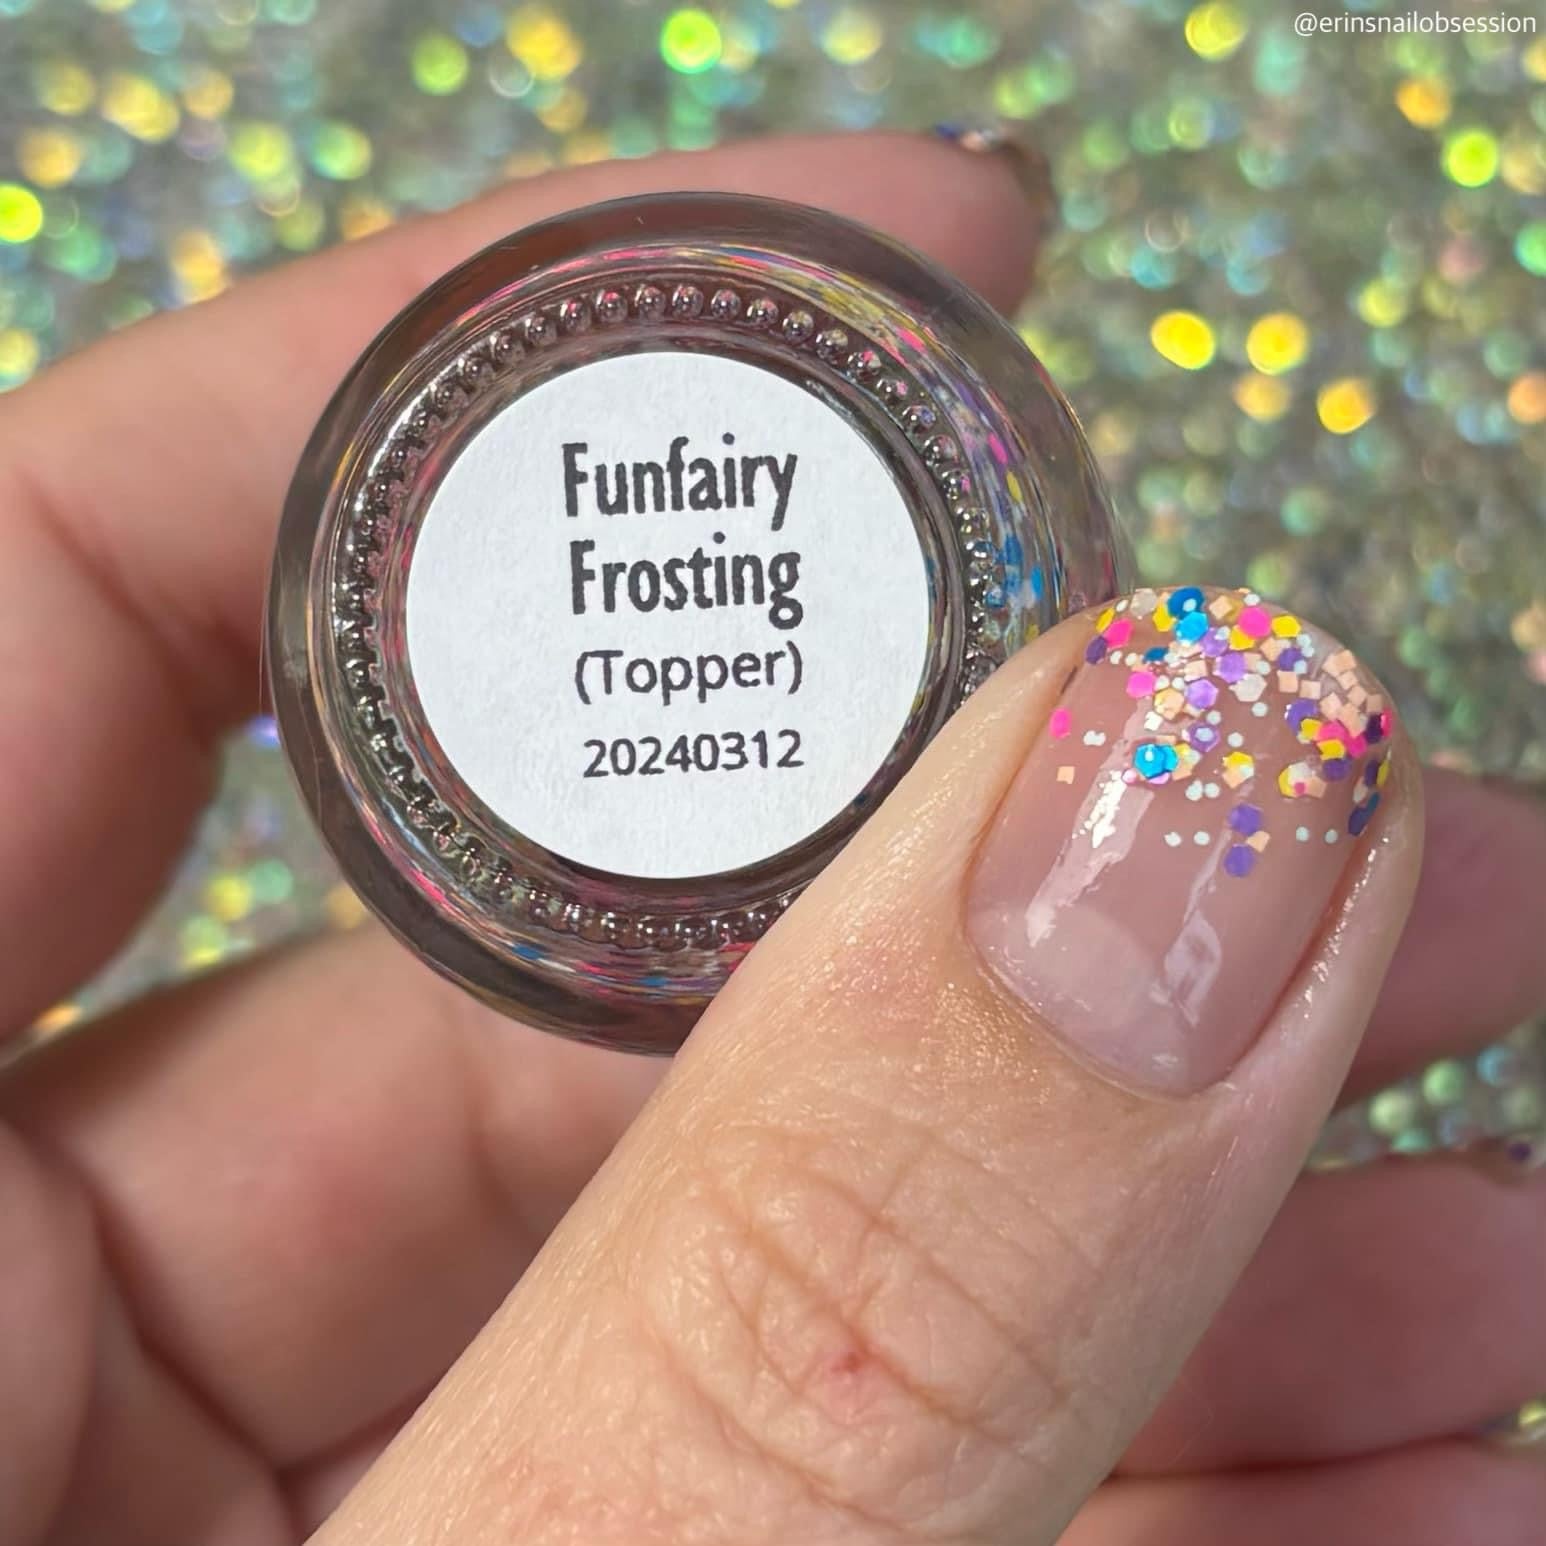 Funfairy Frosting